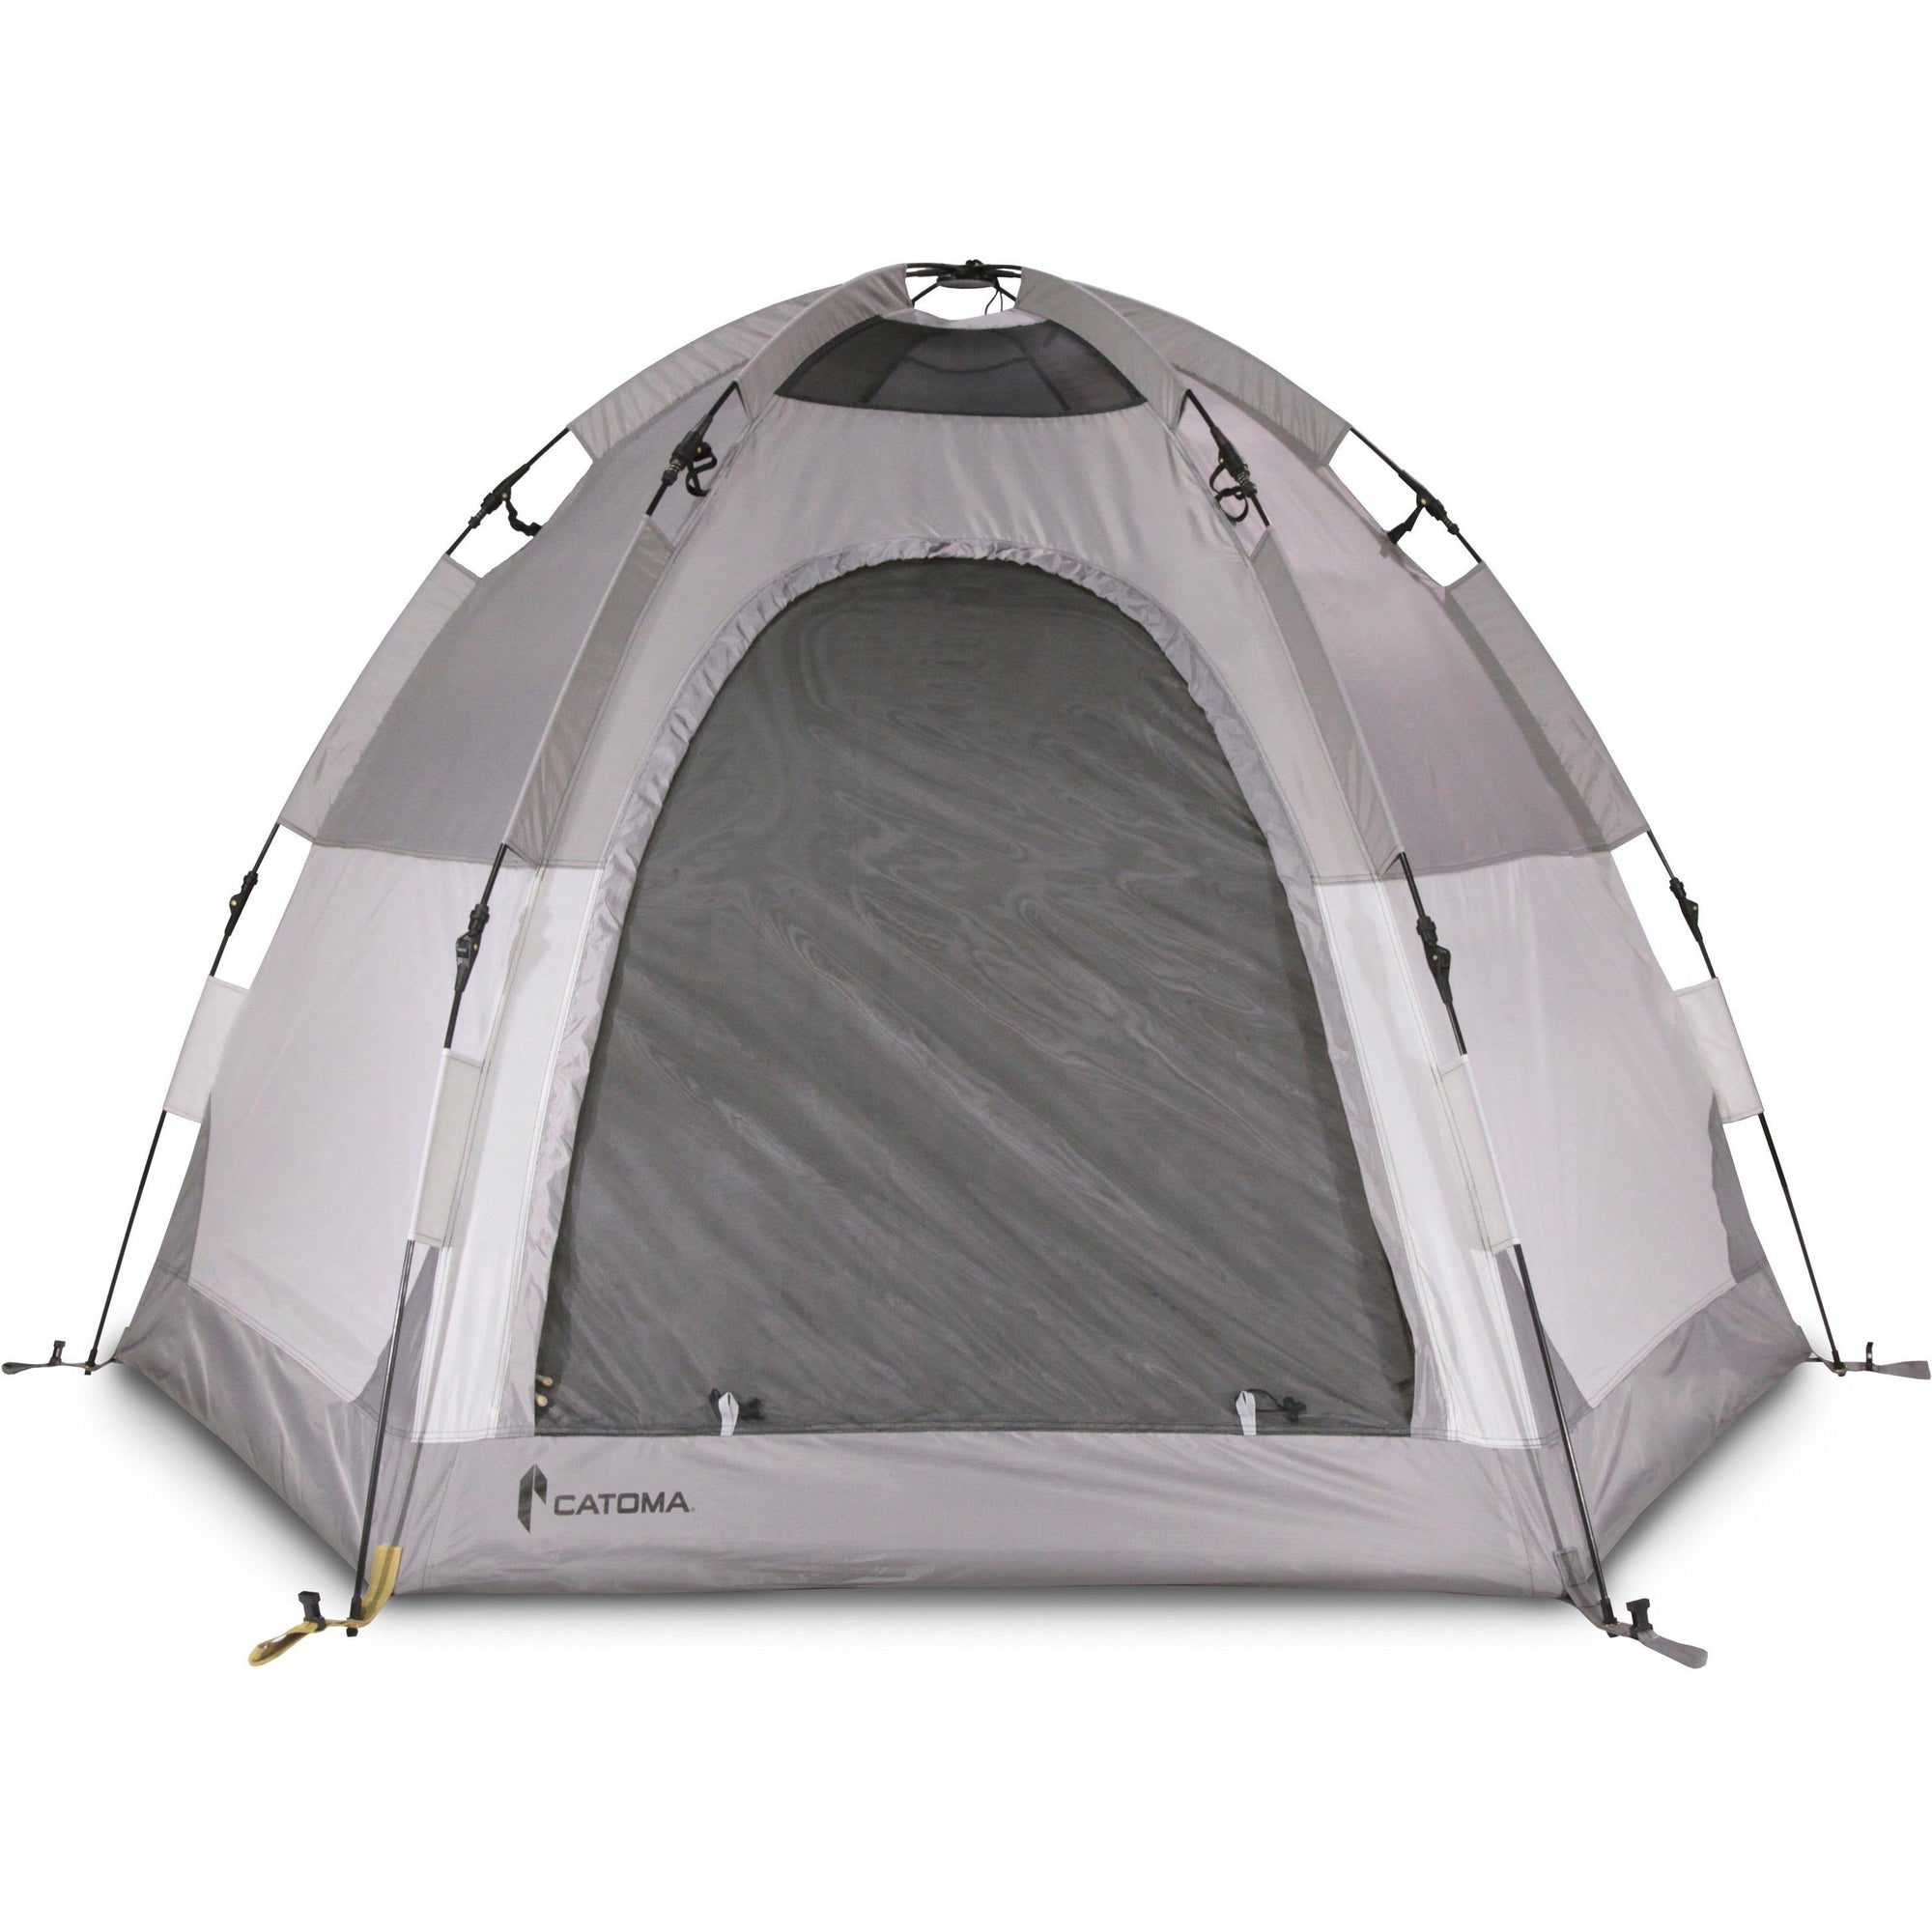 Photo of the front view of the Catoma Raven tent in a white background.